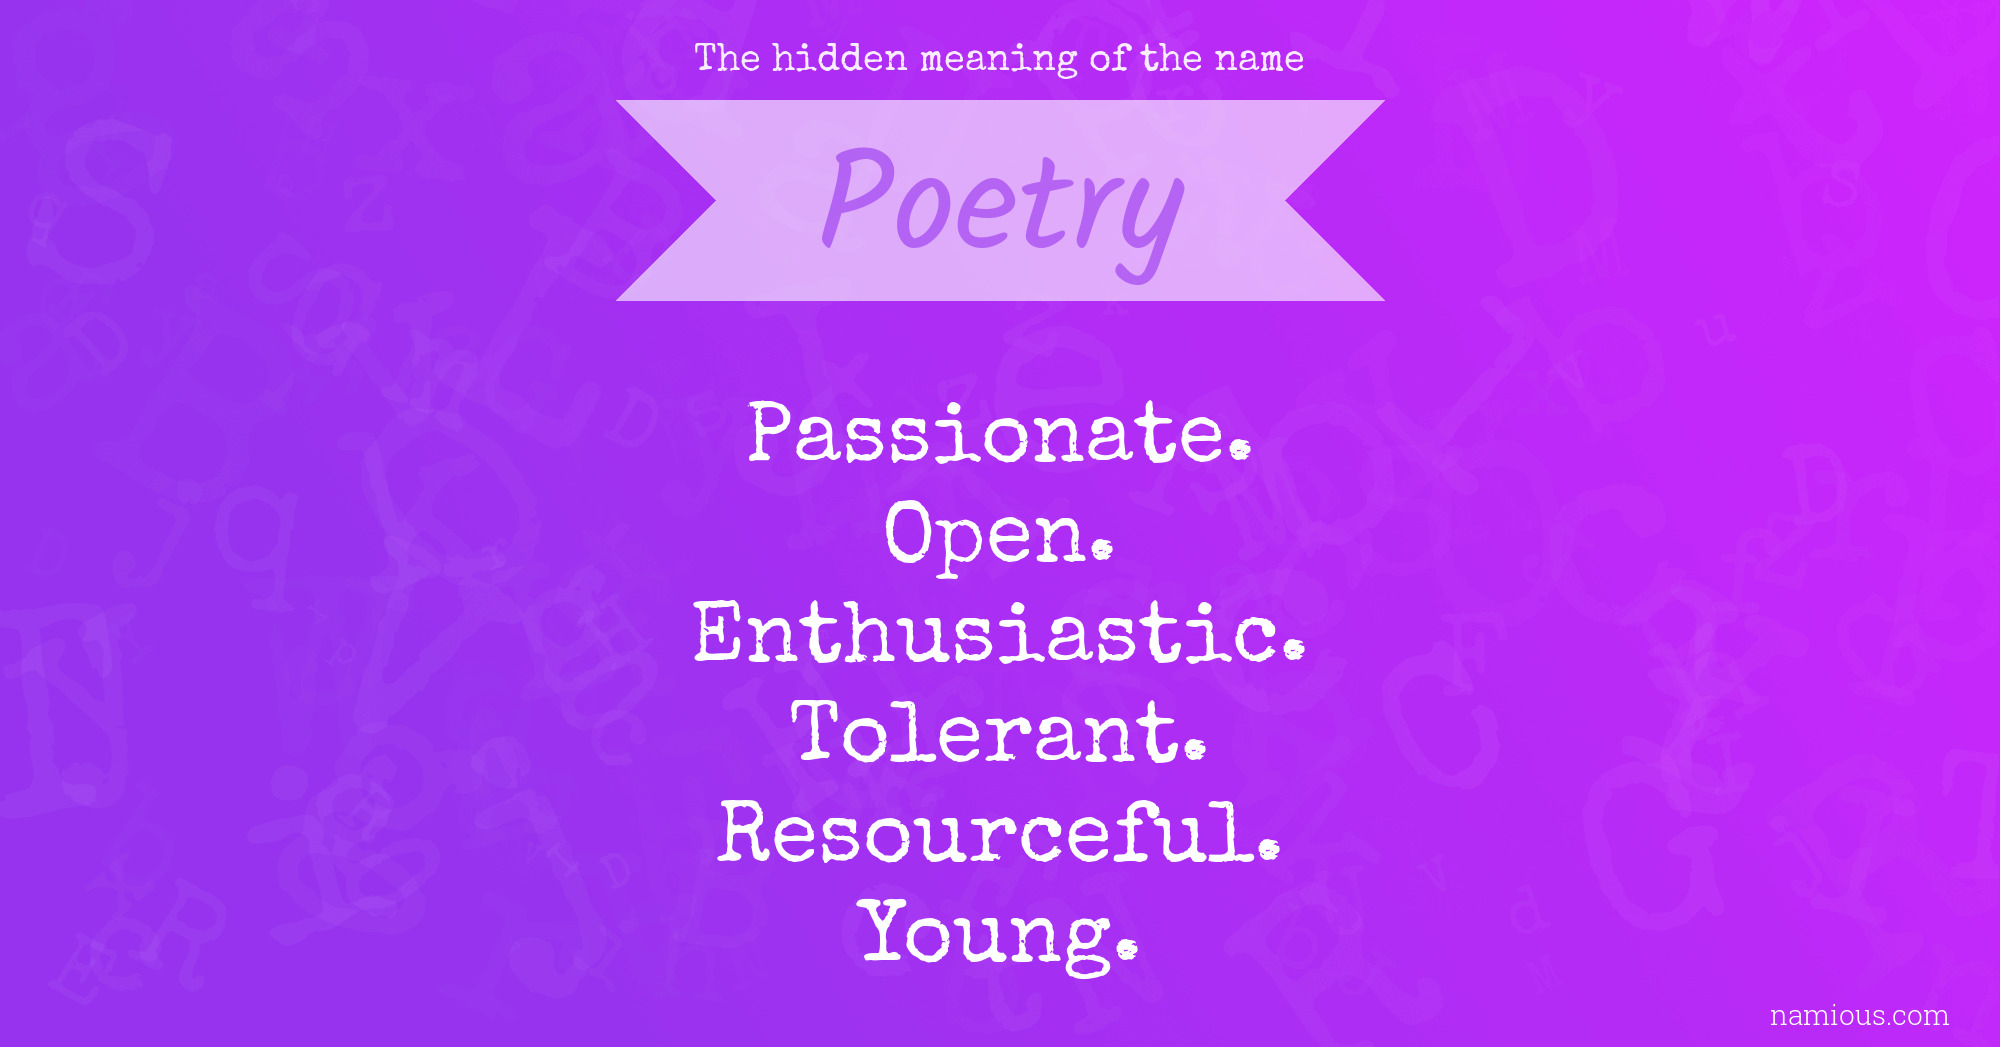 The hidden meaning of the name Poetry